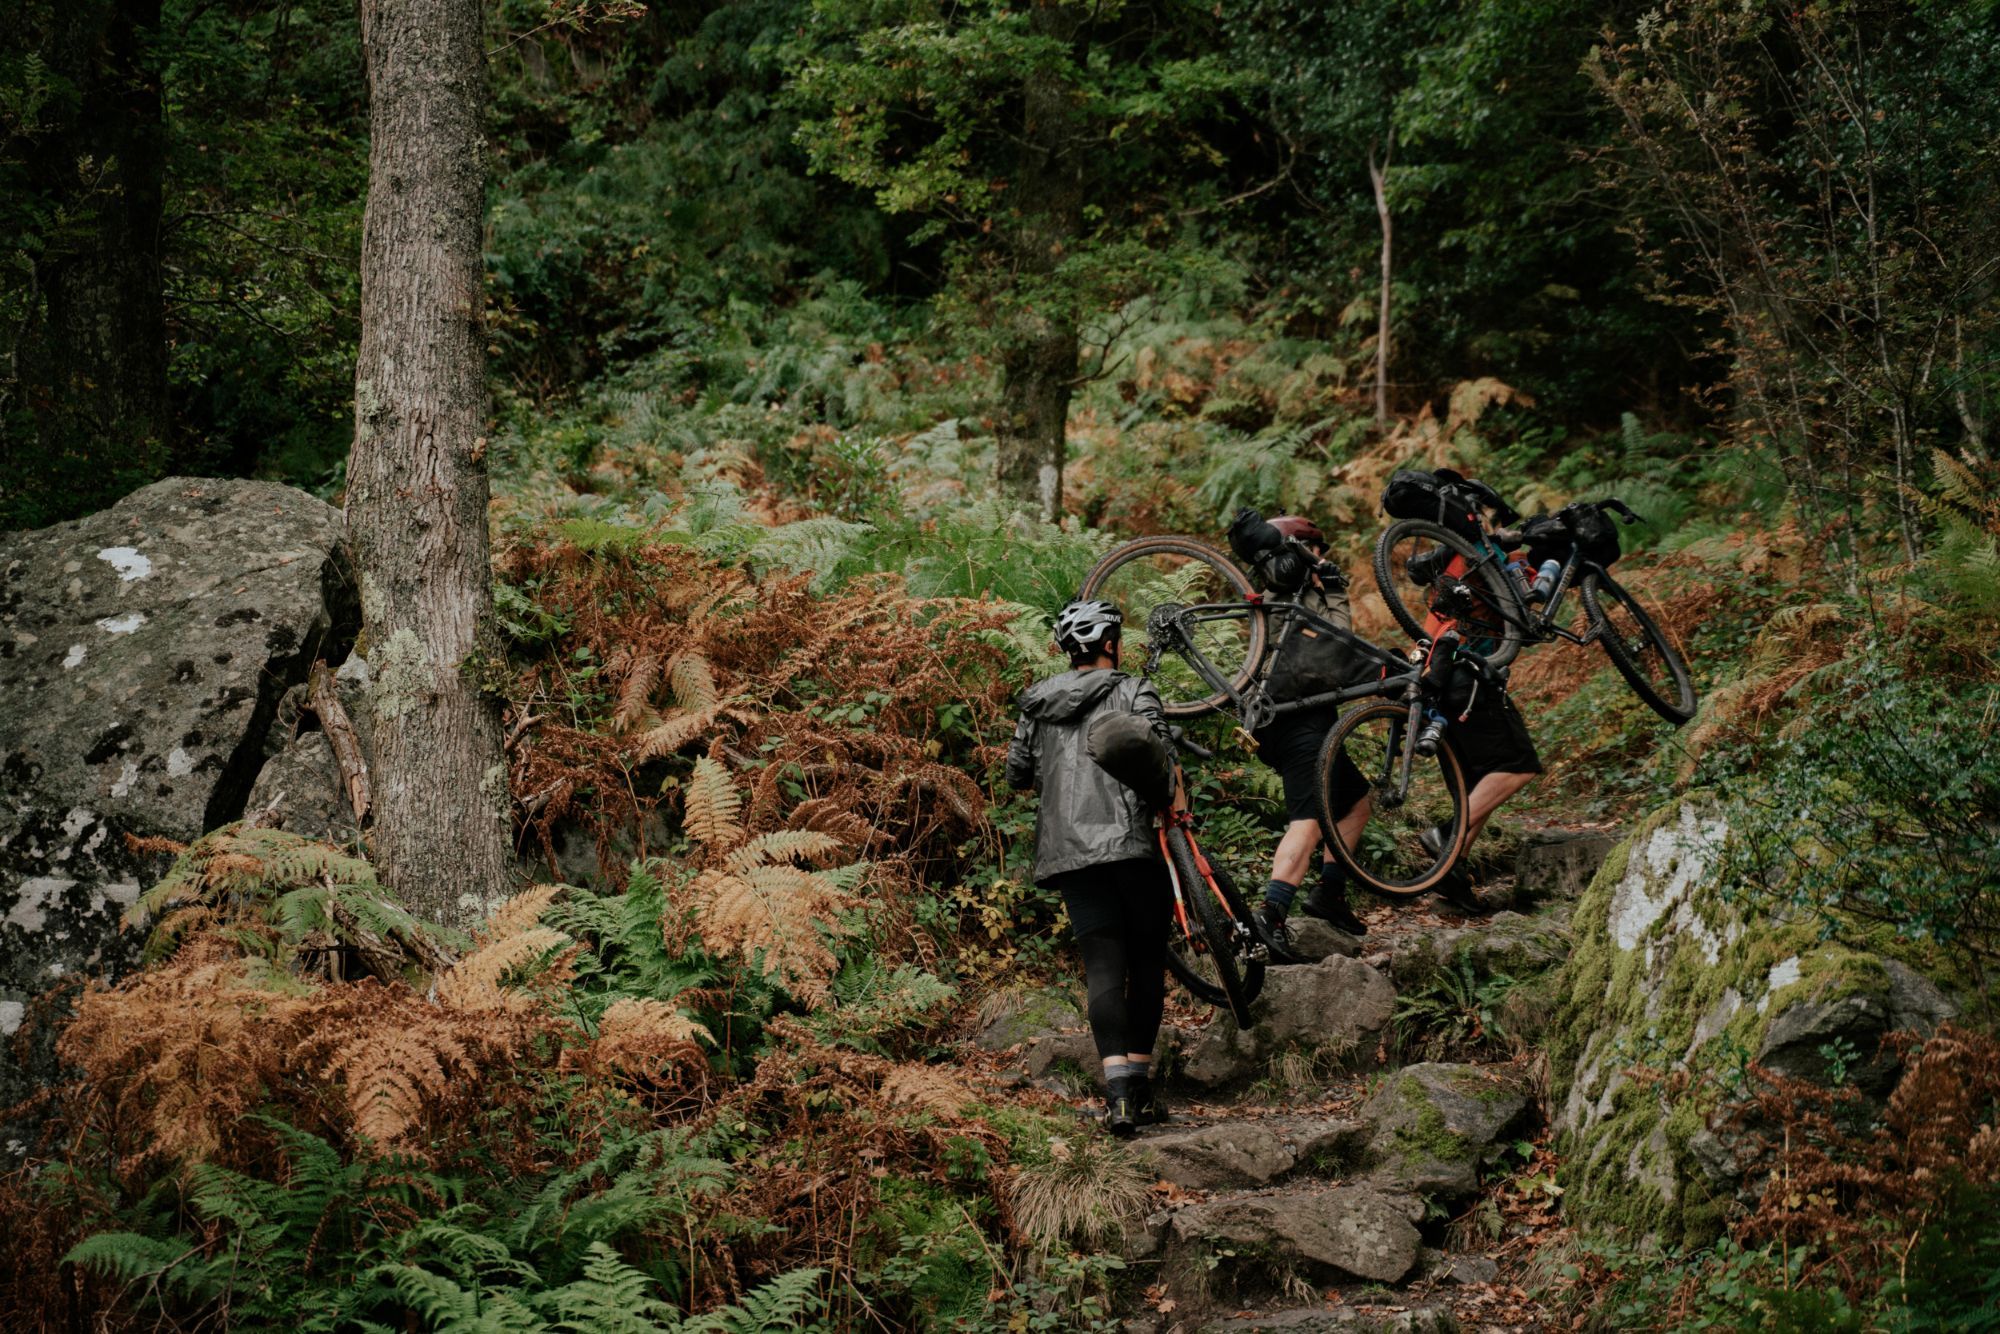 Lee Craigie, Alice Lemkes and Phillipa Battye of the Adventure Syndicate, carrying their bikes up a rocky hill.